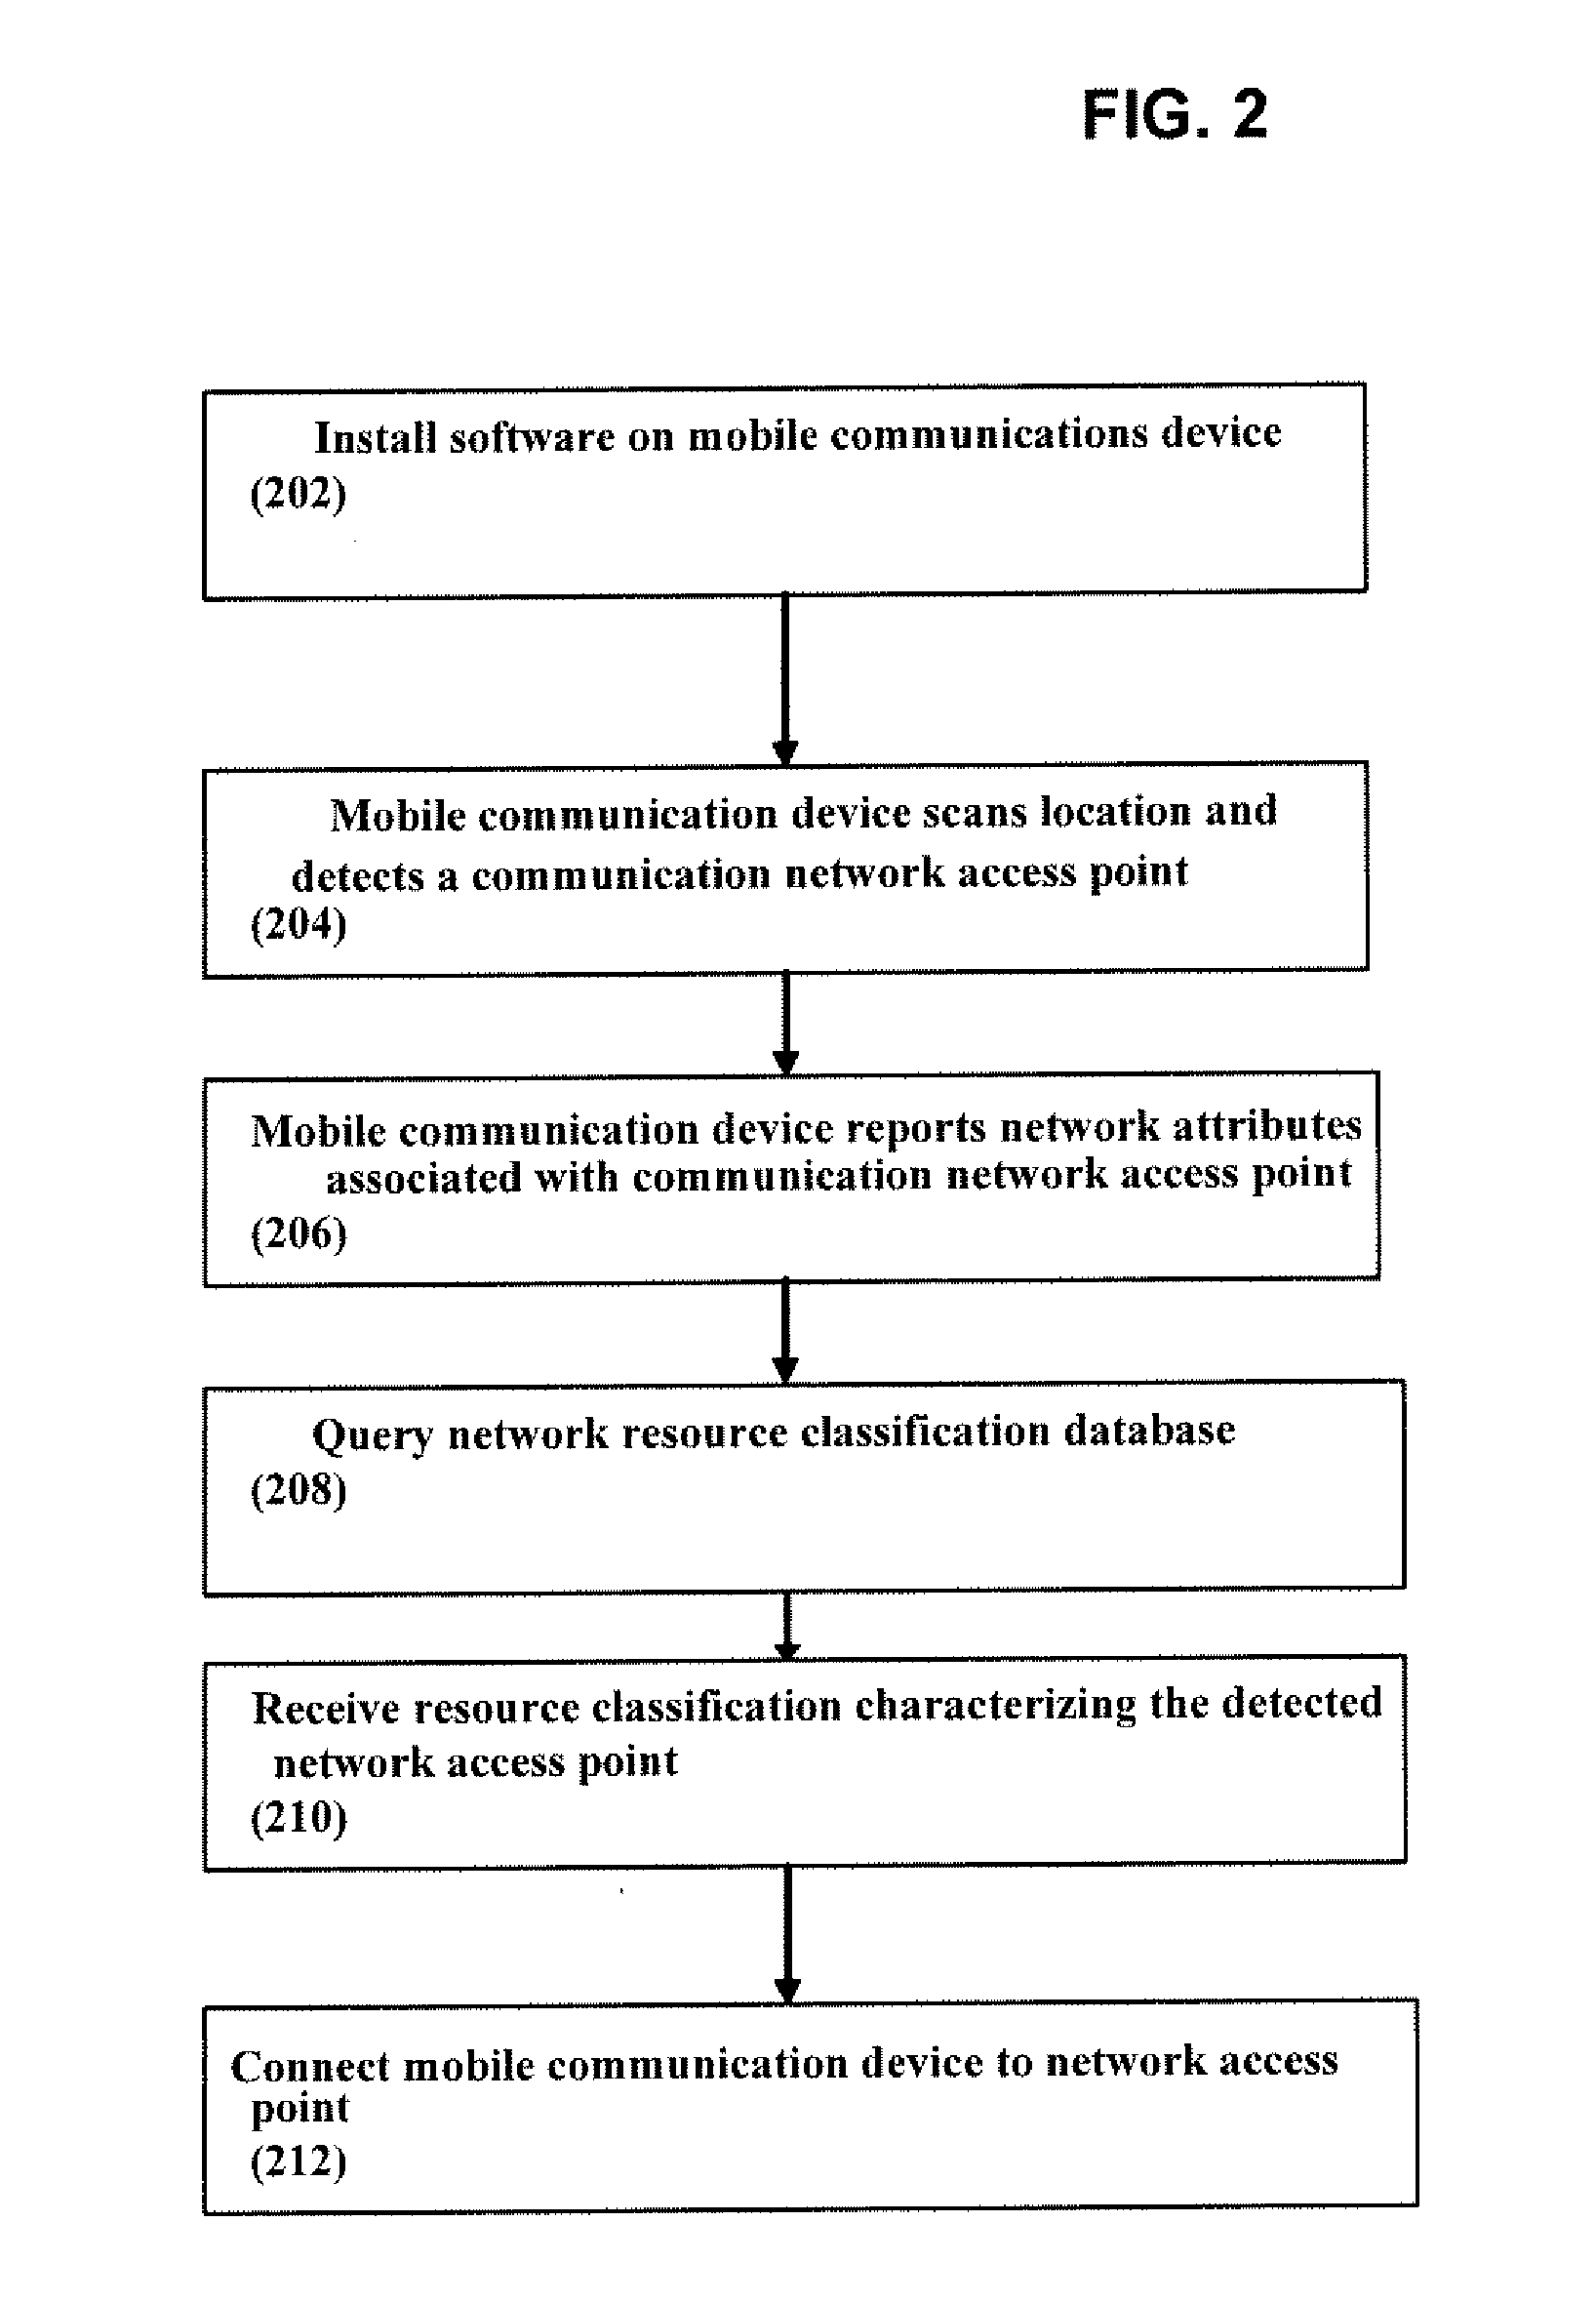 System and Method of Automatically Connecting A Mobile Communication Device to A Network using A Communications Resource Database